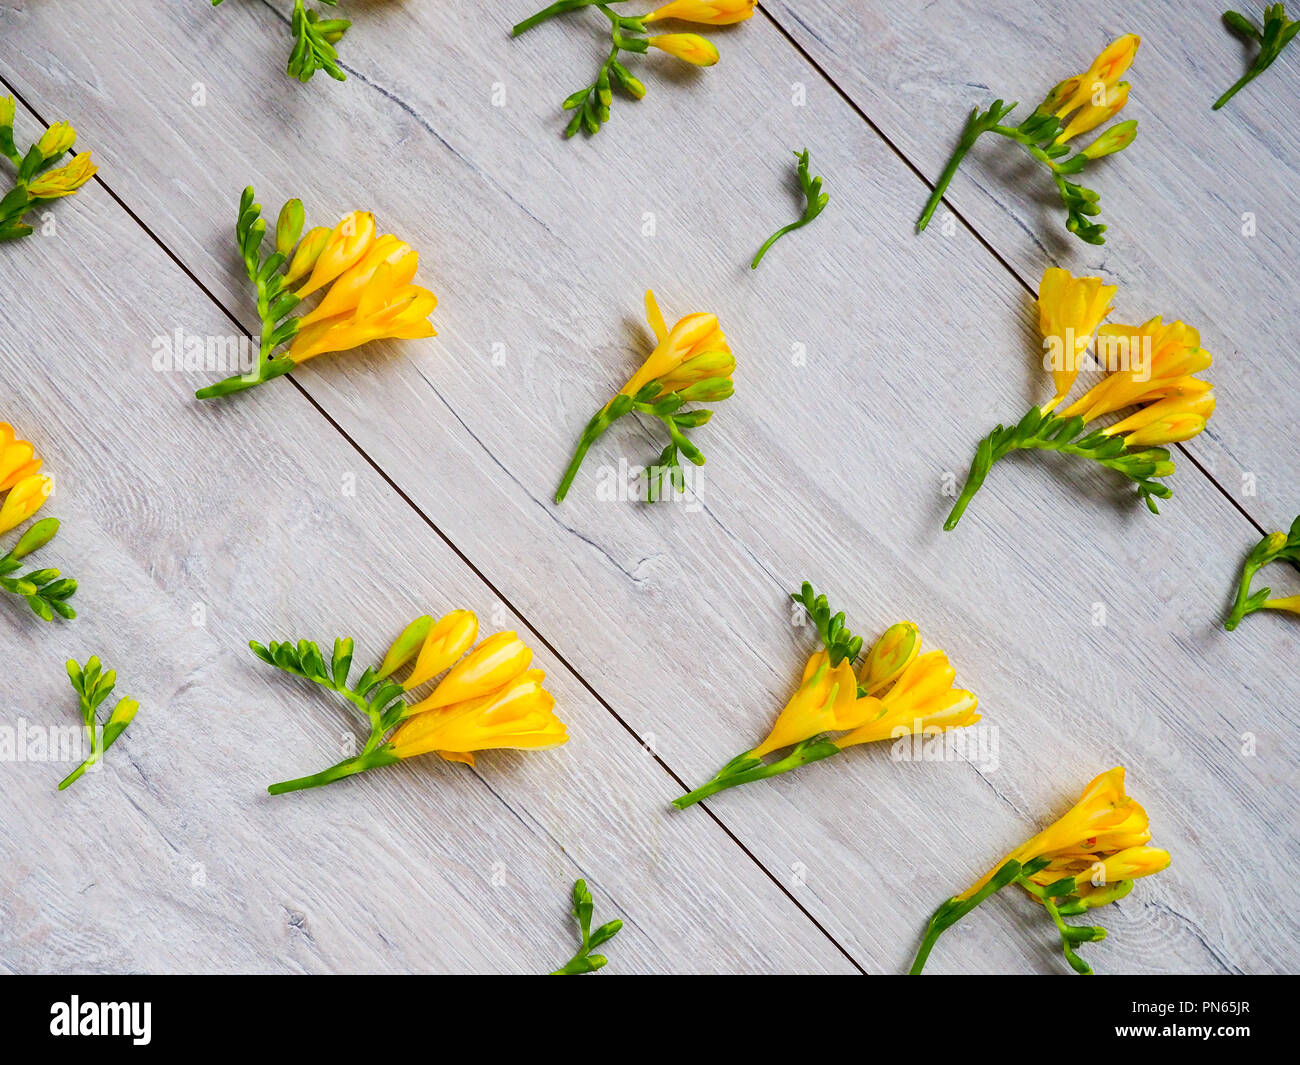 Beautiful flowers on a wood background, celebration, greeting card, space for text. Stock Photo